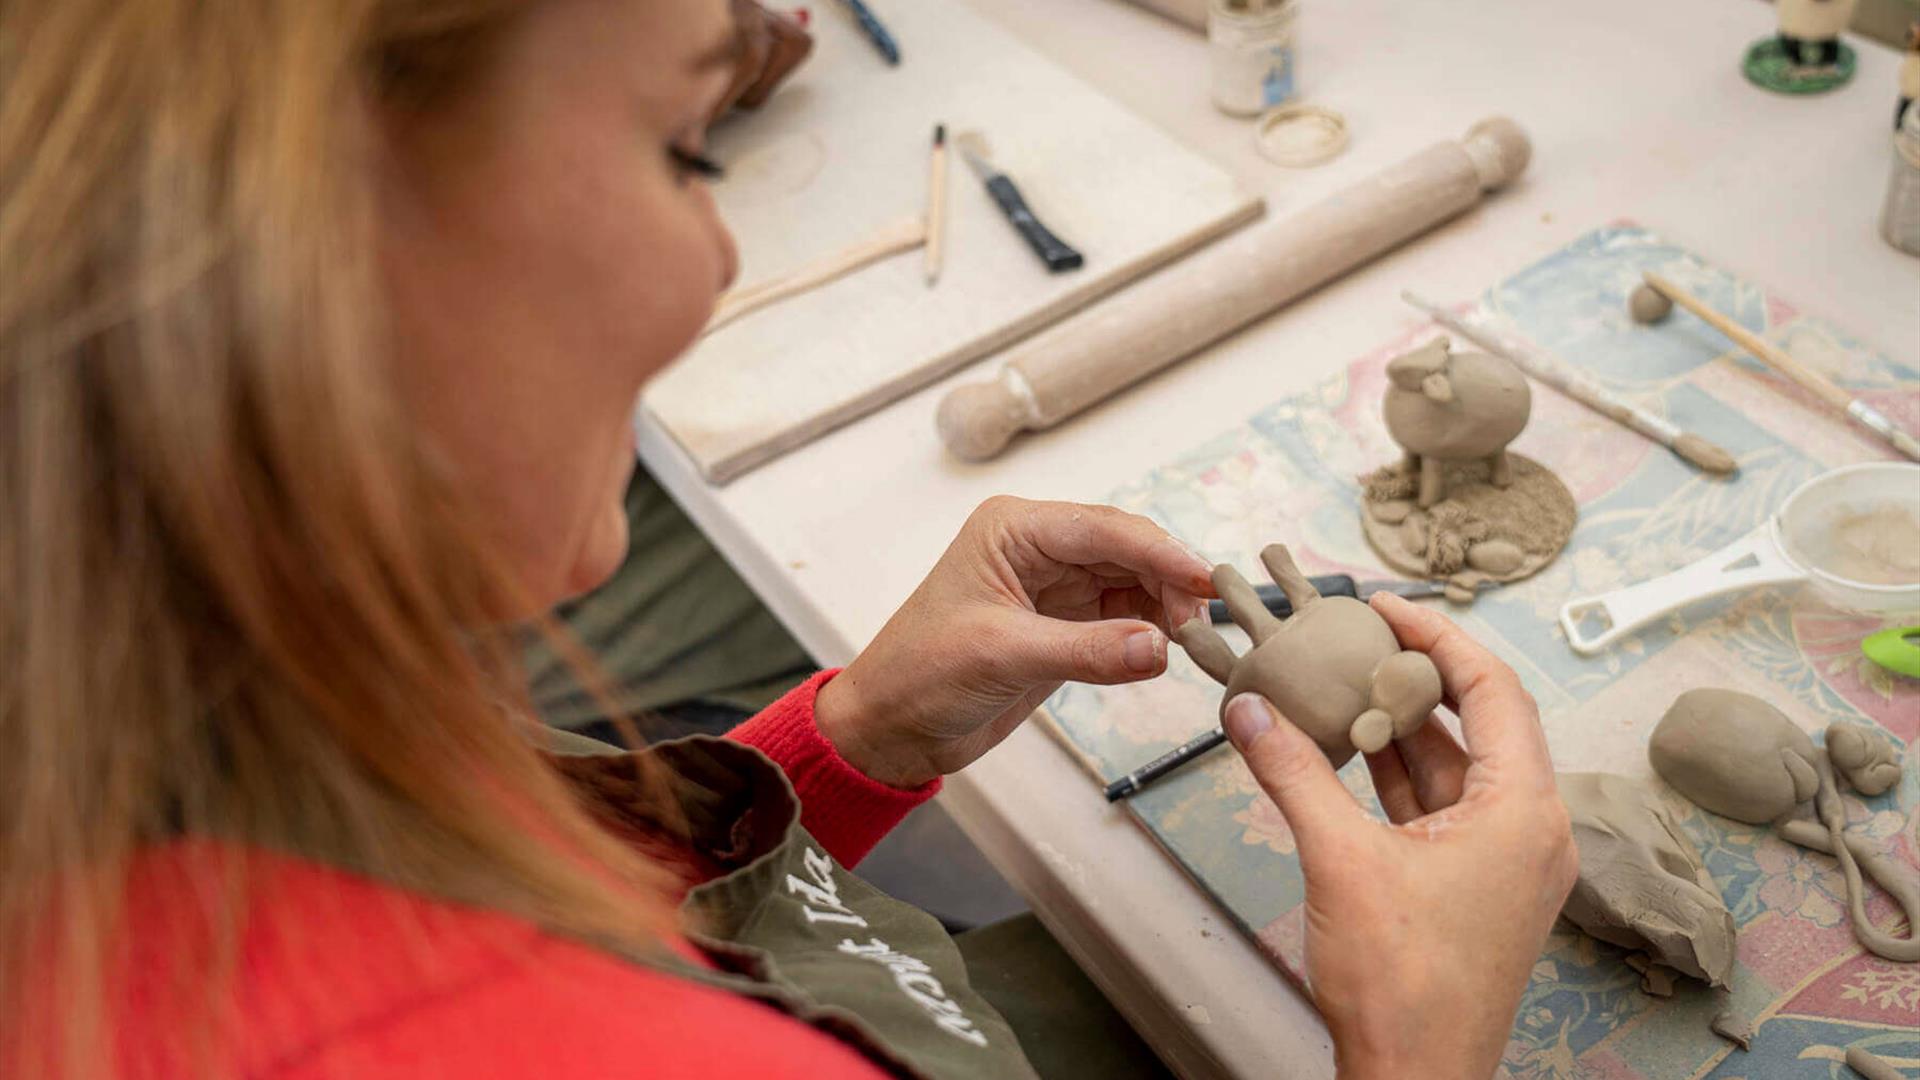 During the handmade to last experience you'll learn how to create your own clay farm animal